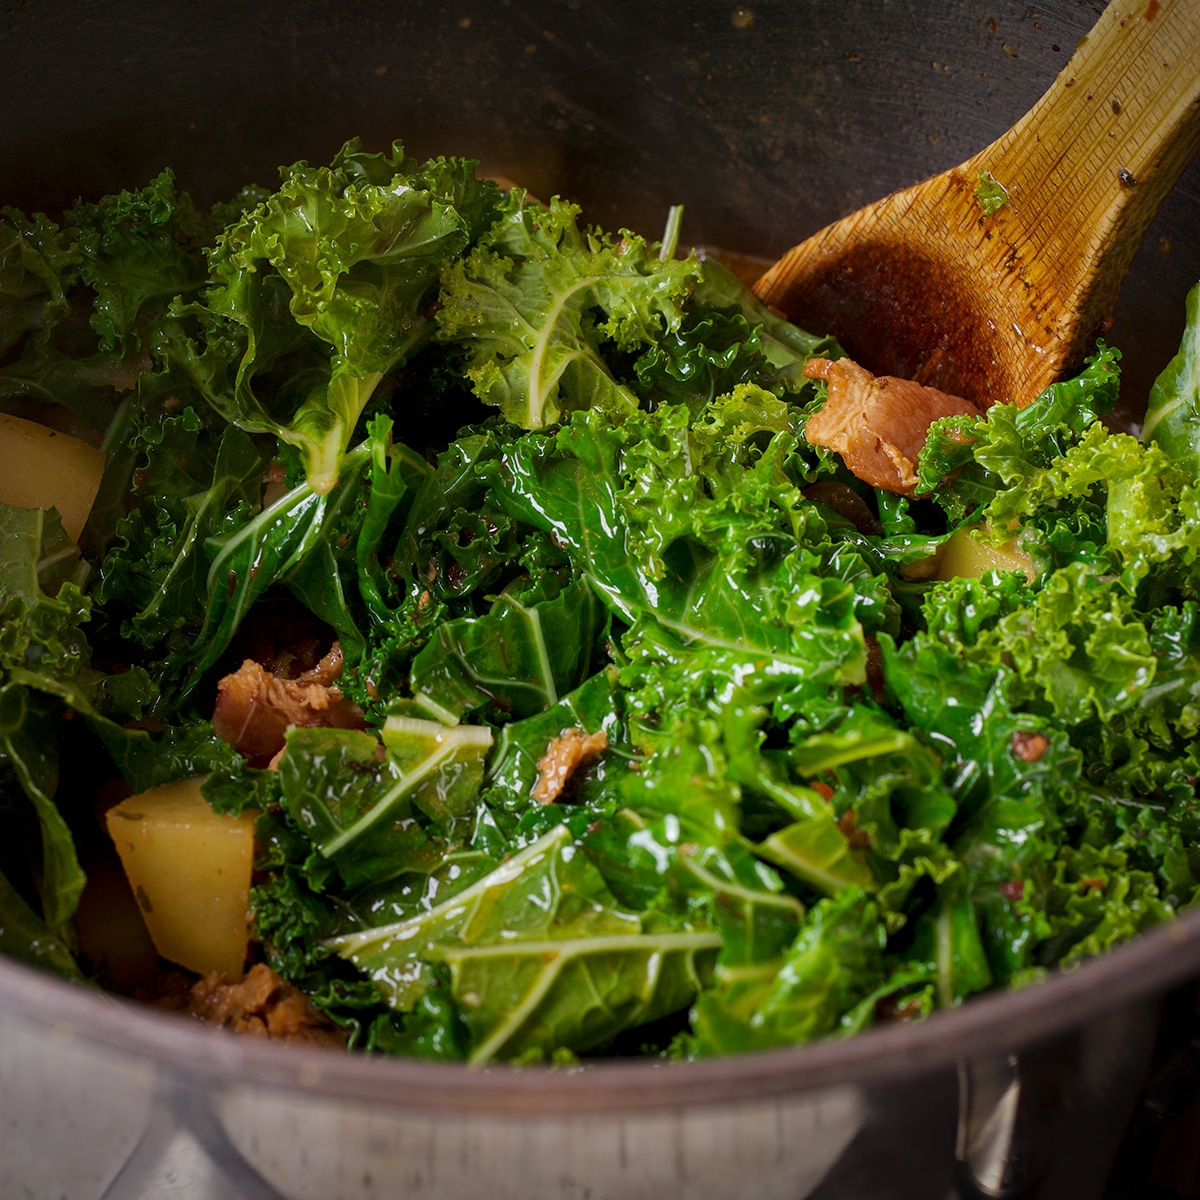 Adding chopped kale to the saucepan along with the cooked potatoes, sausage, and bacon.